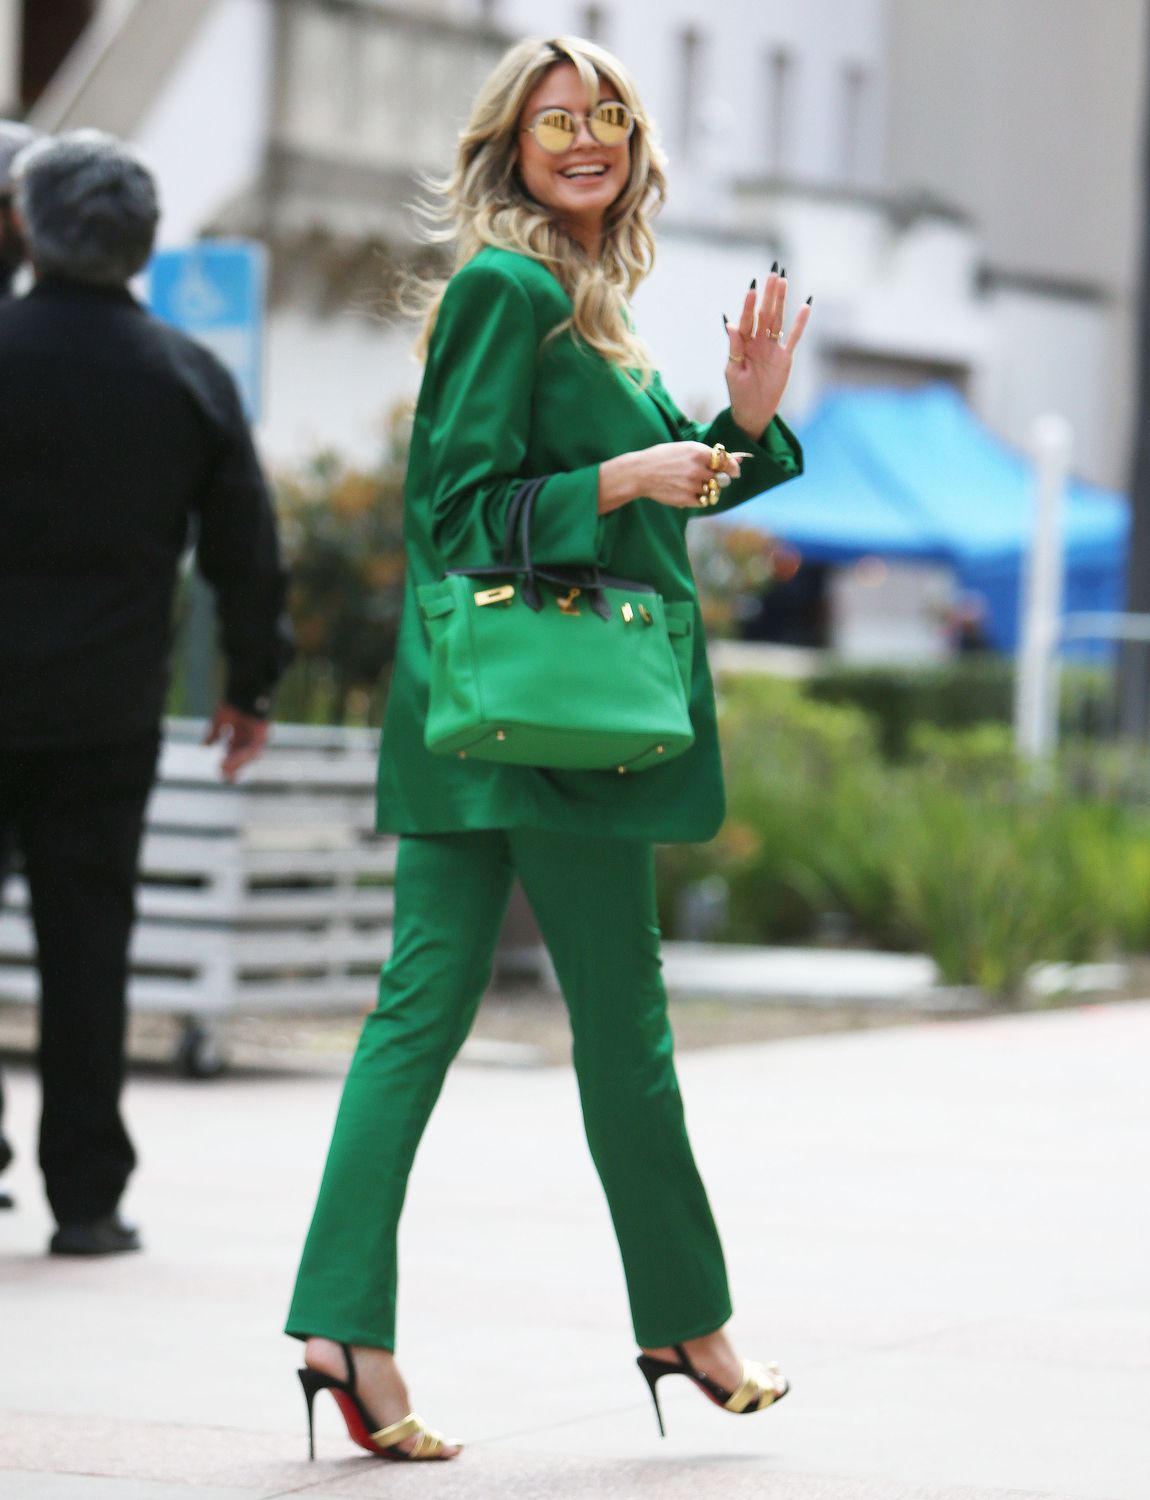 Heidi Klum is spotted arriving to the set of America's Got Talent in Pasadena, California.